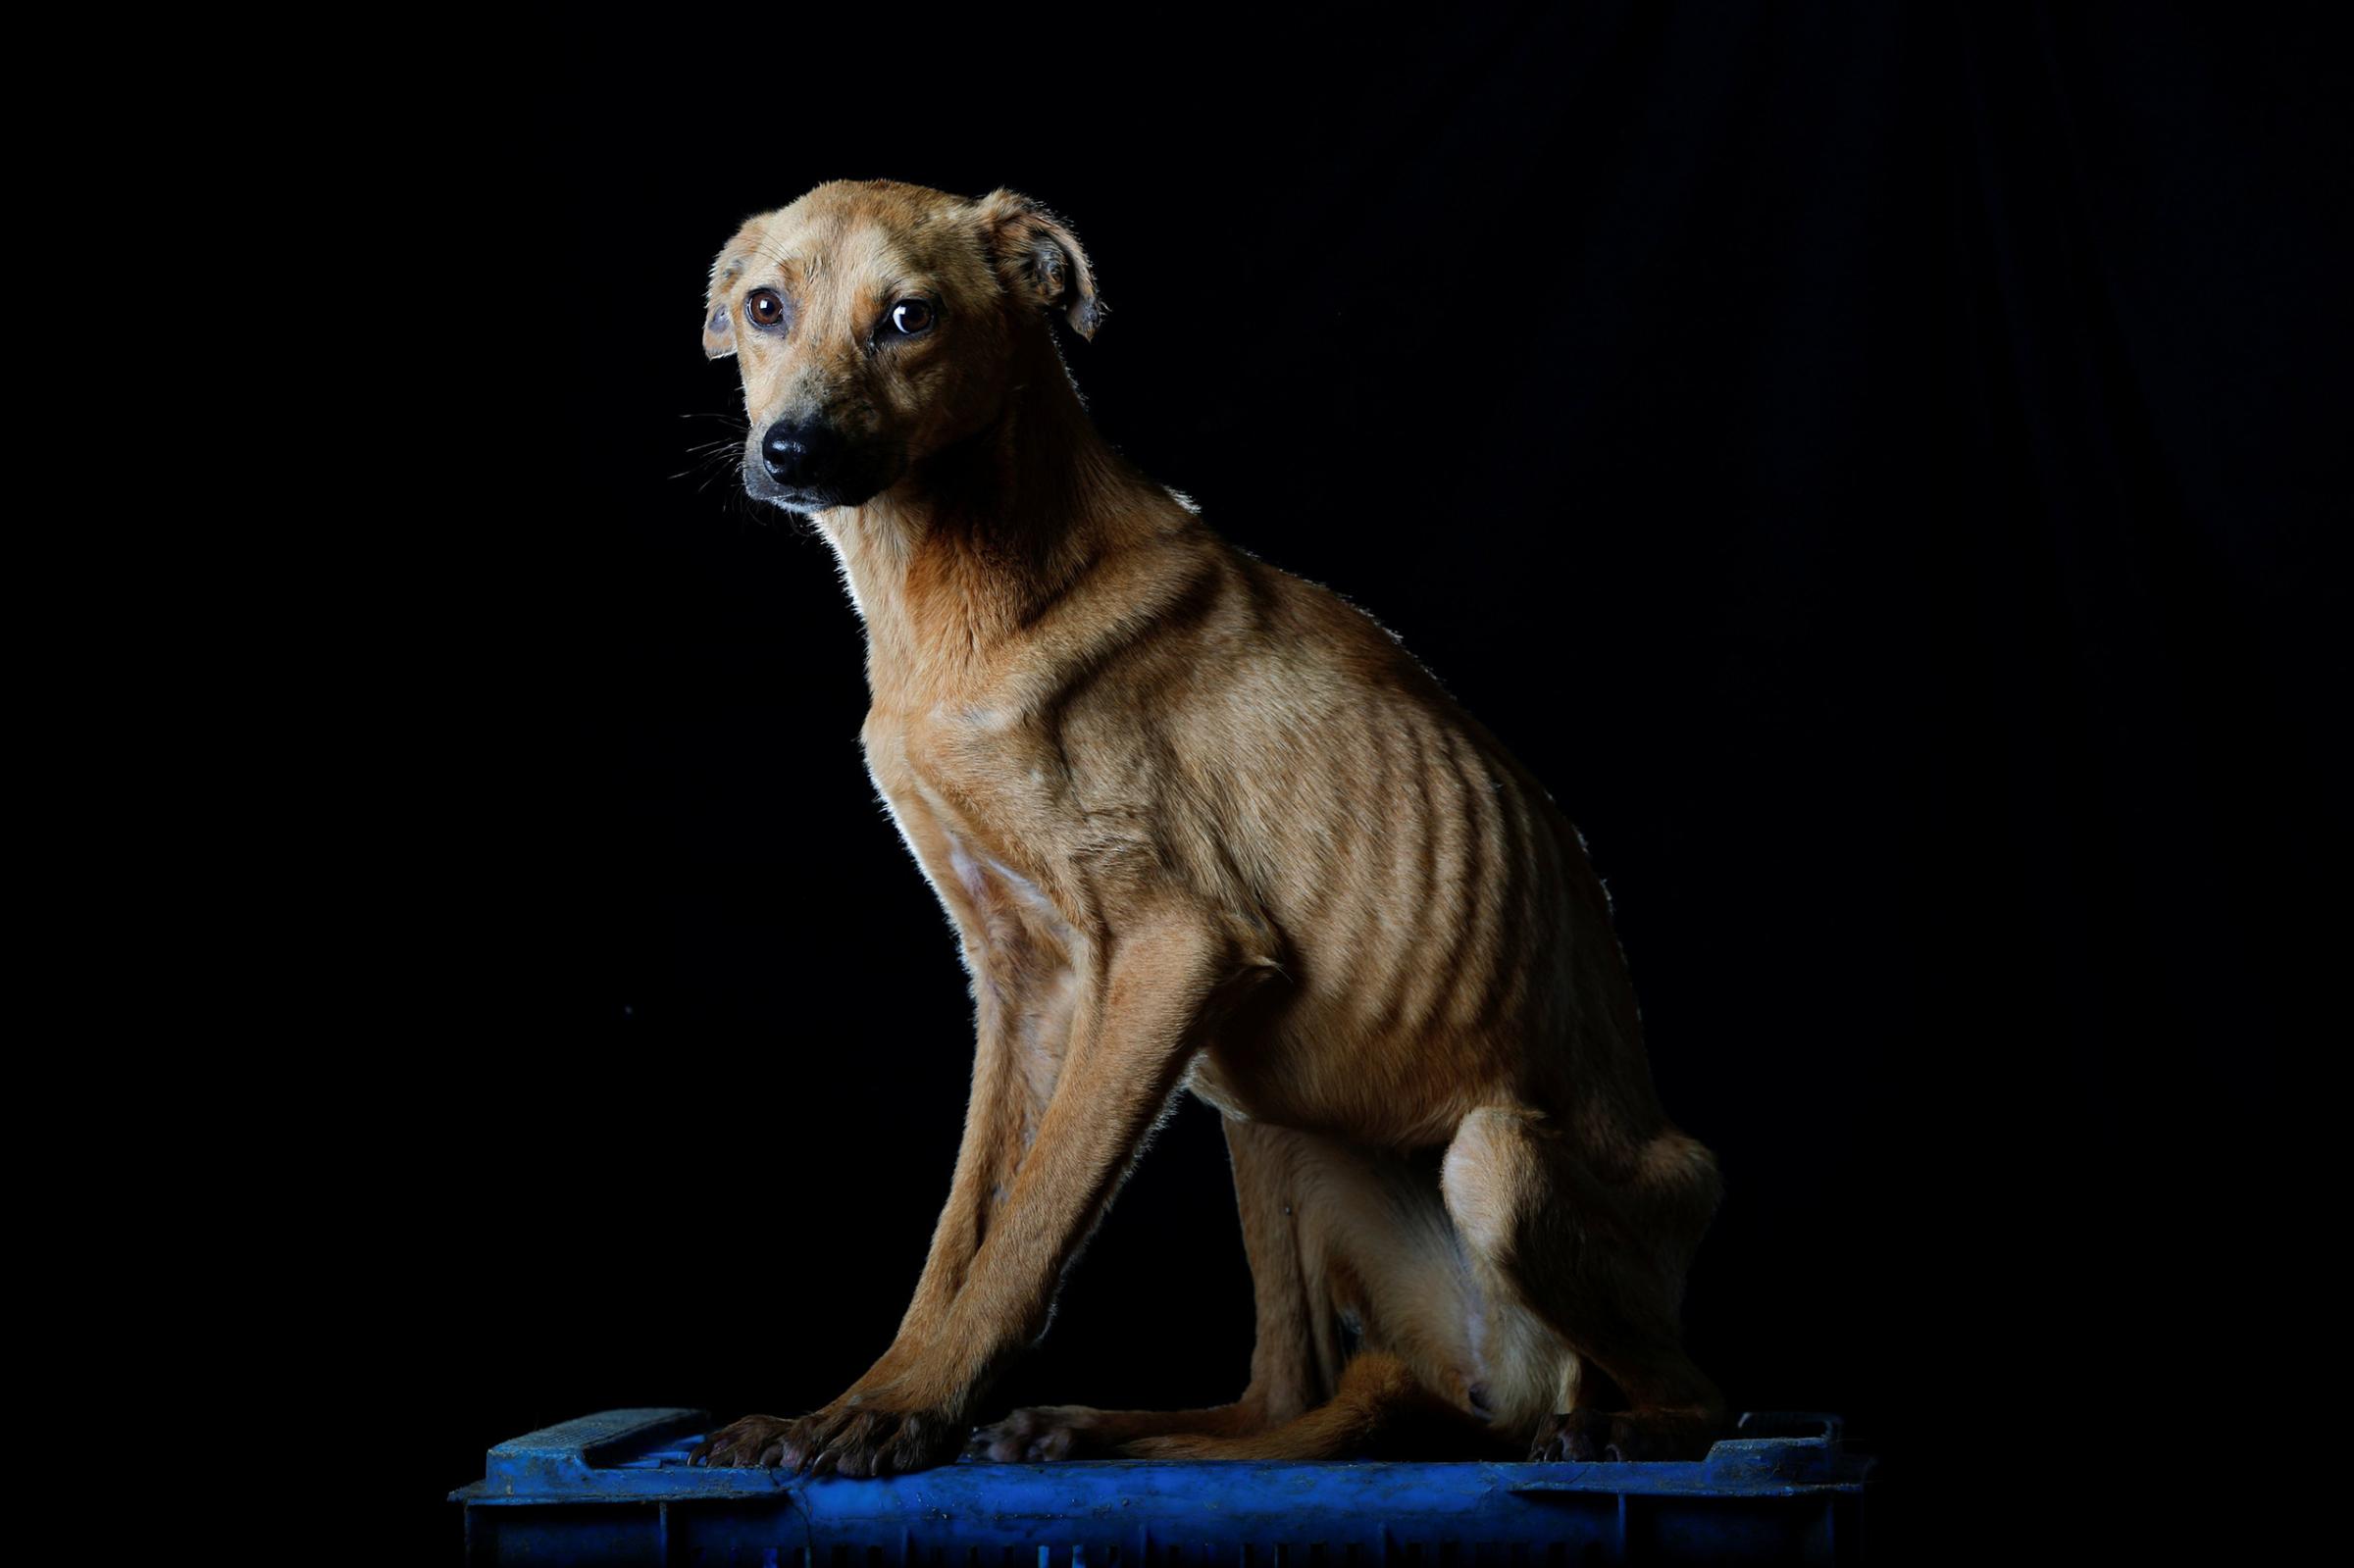 Sonrisa is pictured at the Famproa dogs shelter in Los Teques, Venezuela Aug. 16, 2016. "Sonrisa (smile), was given that name, because when someone approached her, she was frightened as if she were being beaten, but showing her teeth as if were smiling," said Maria Silva who takes care of dogs at the shelter. Sonrisa died the following week after the photo was taken.